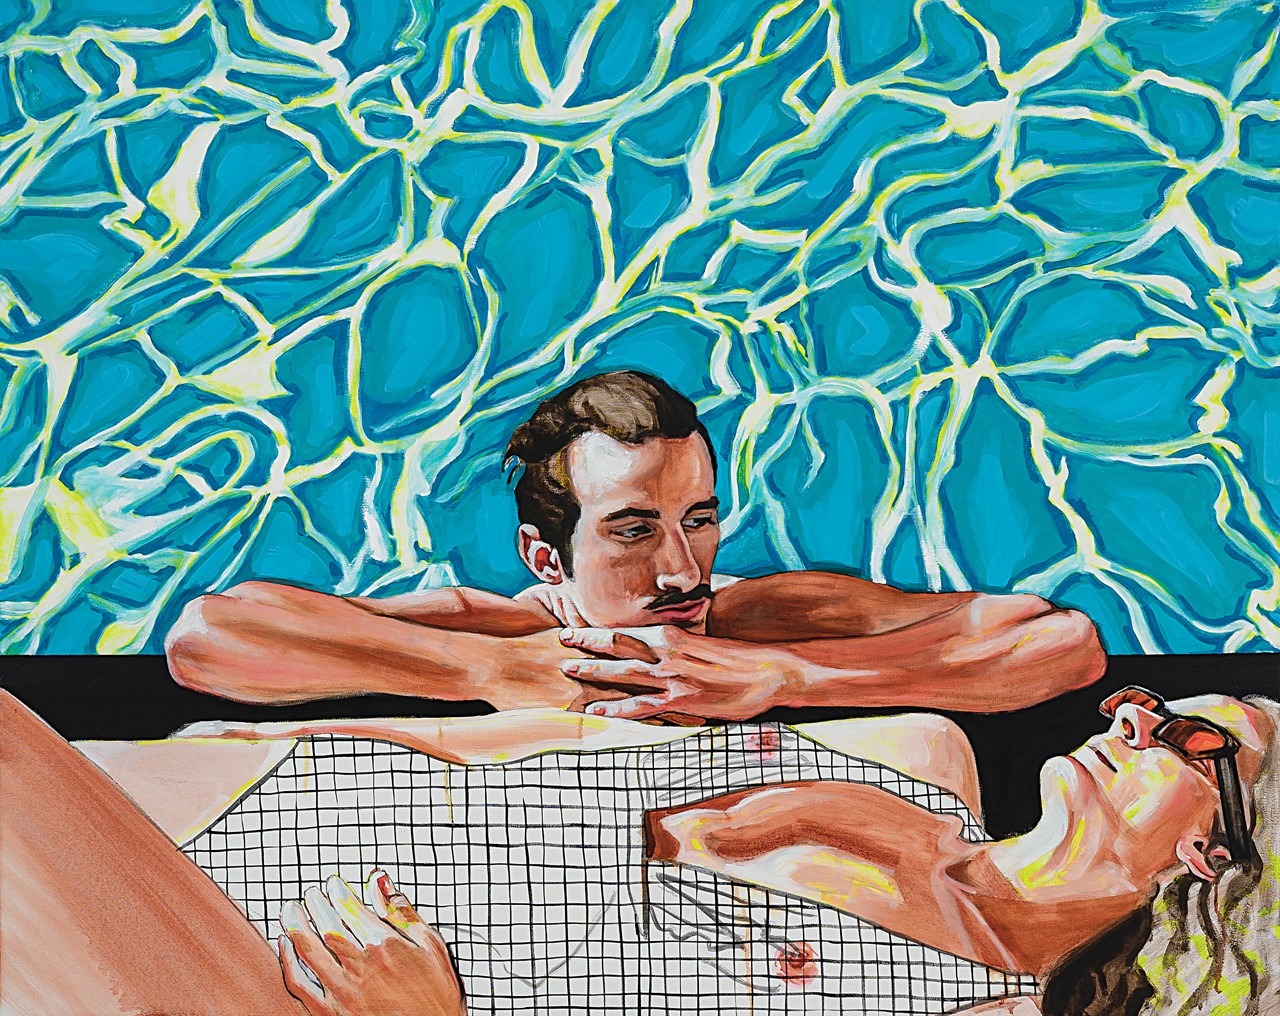 stella-kapezanou-when-im-with-you-i-always-have-a-good-time-2022-oil-on-canvas-120x150-cm-472-x-59-in.jpg